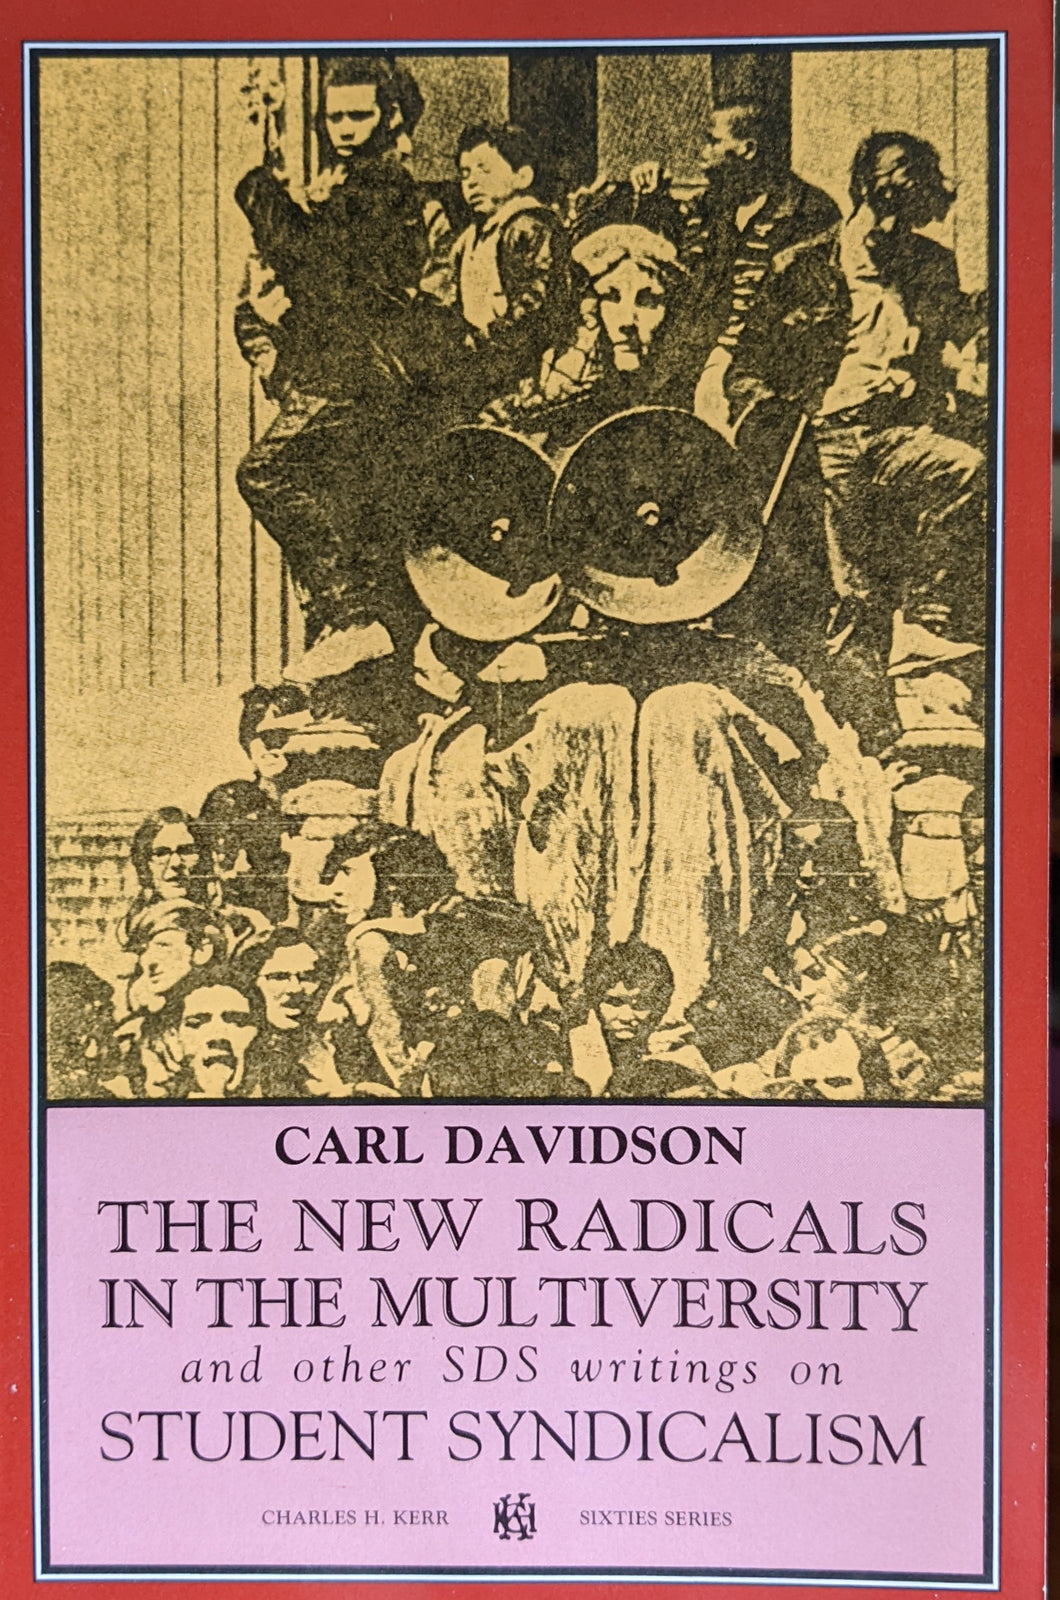 The New Radicals in the Multiversity: And Other SDS Writings on Student Syndicalism